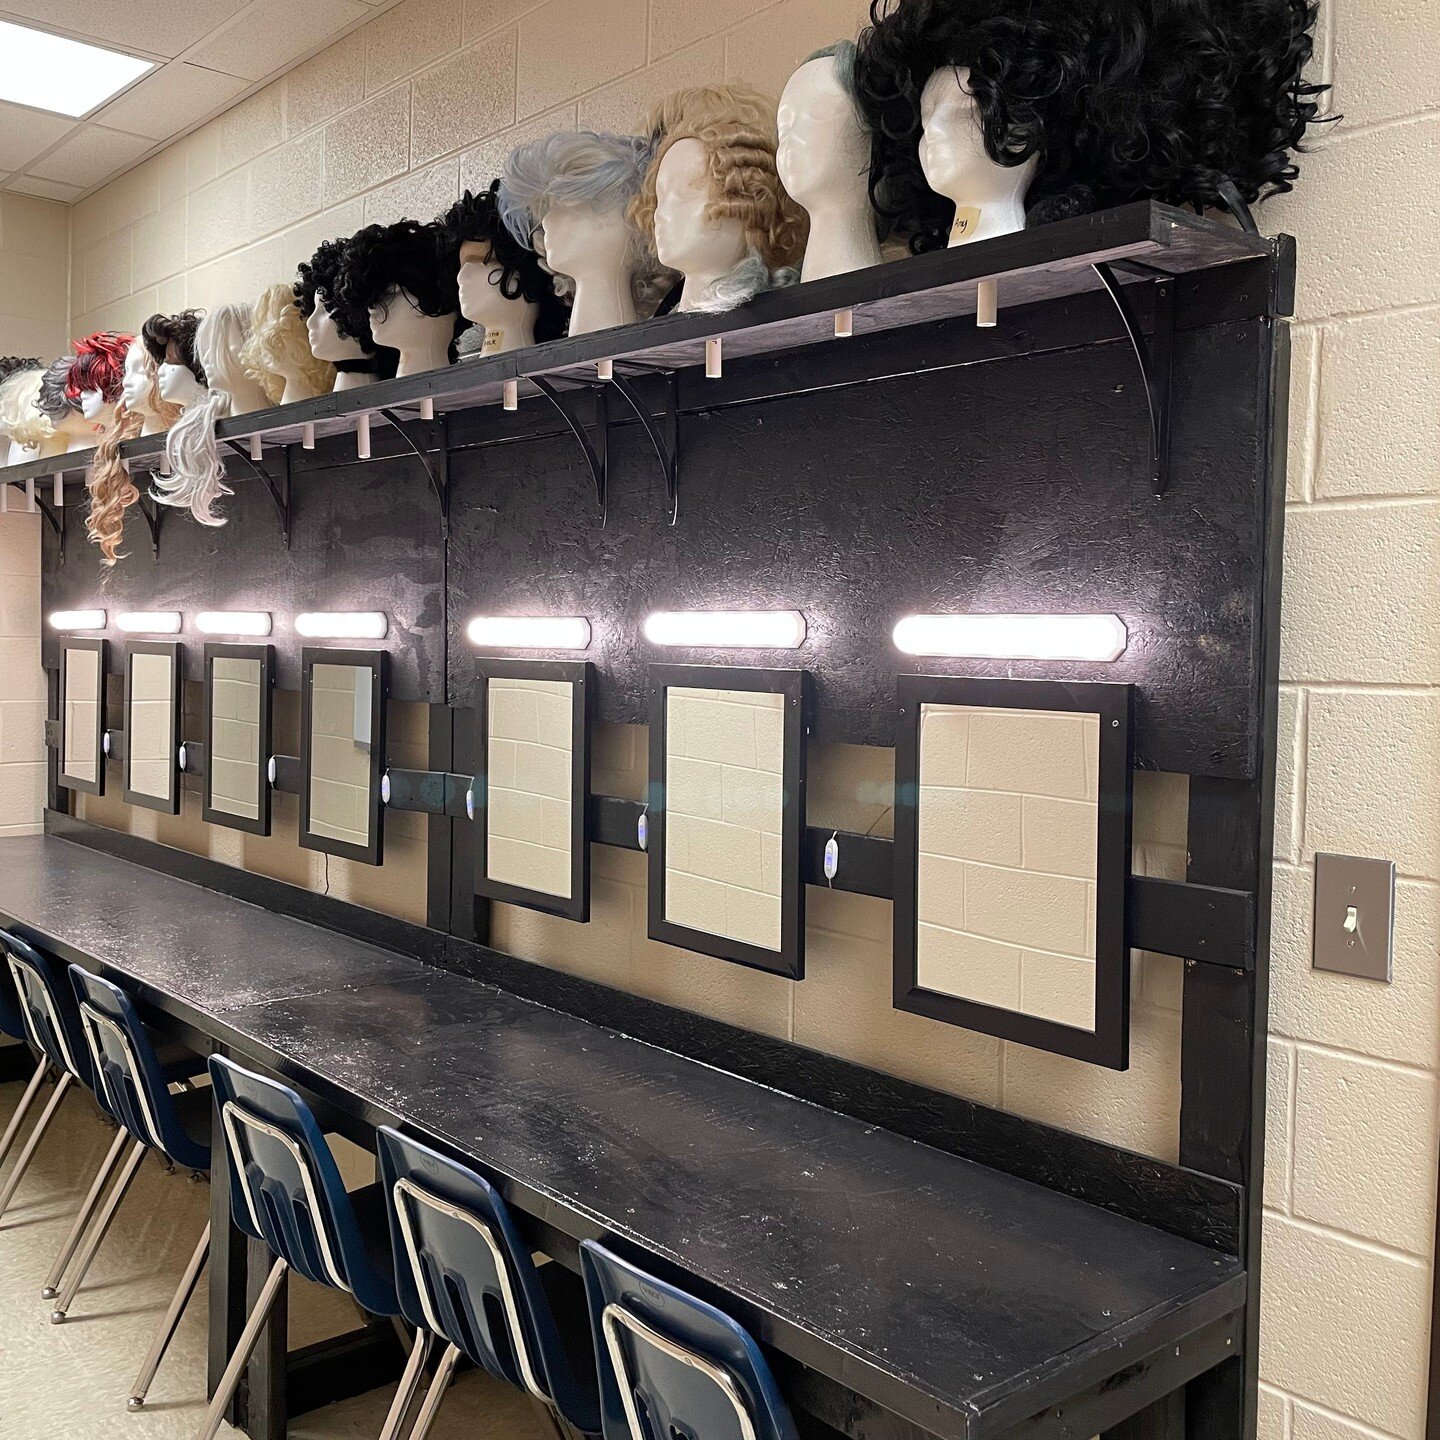 Introducing our new theatre makeup room! C.A.S.T is thrilled to provide our actors with a new space to transform into their characters. 🎭 🥸

Thank you to Mr. Kelley and Liam Taylor for all their hard work on building this.👏